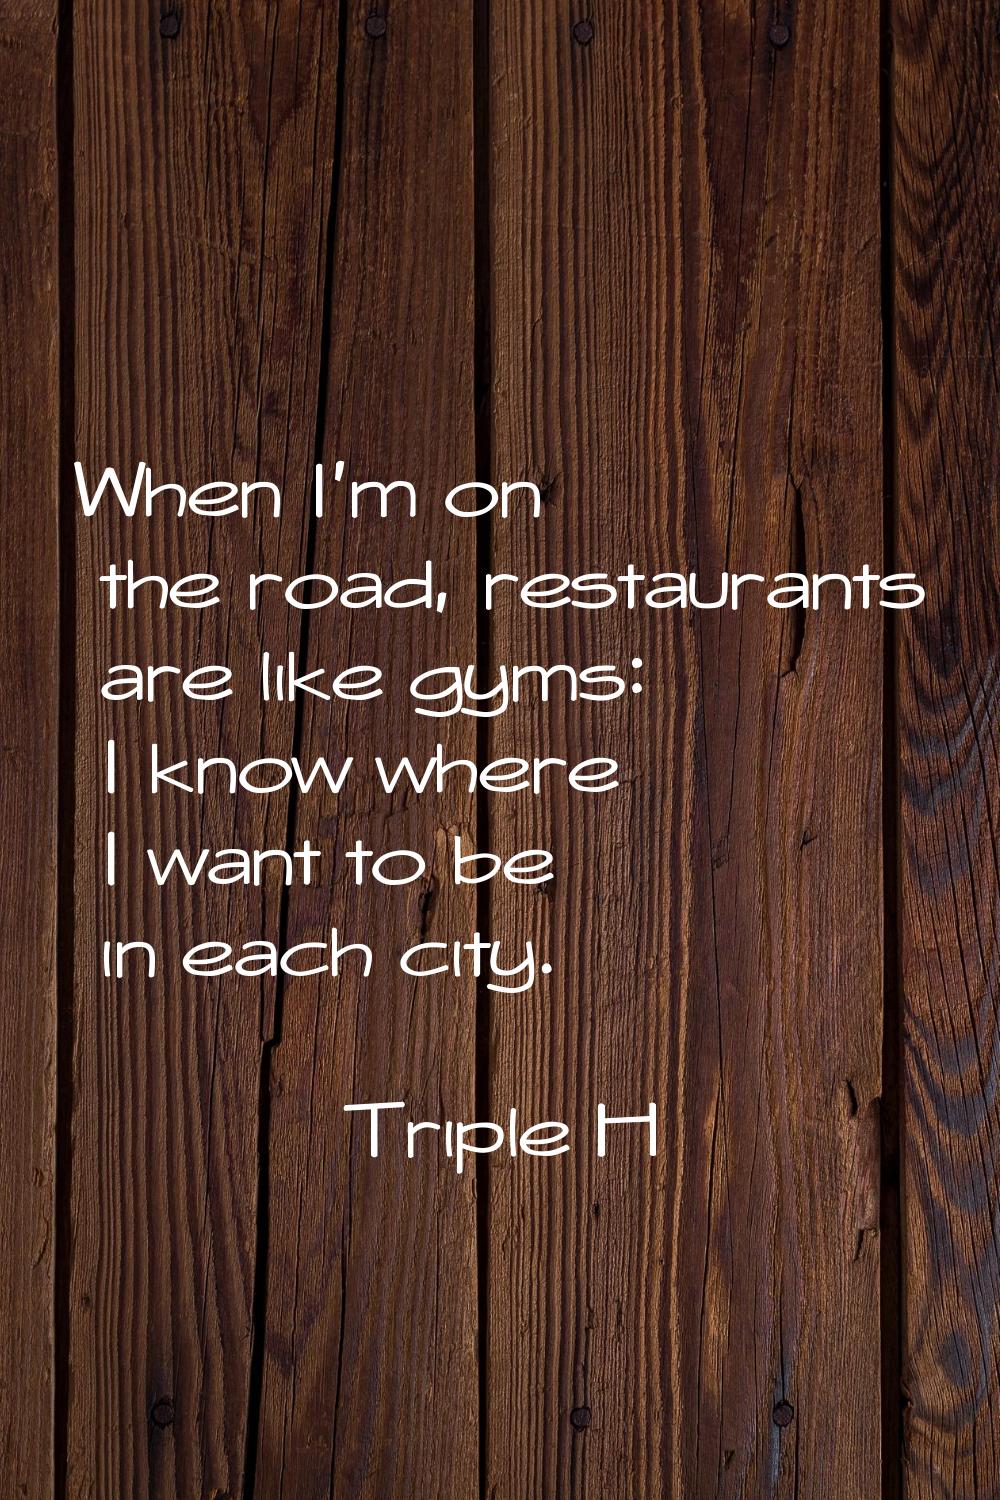 When I'm on the road, restaurants are like gyms: I know where I want to be in each city.